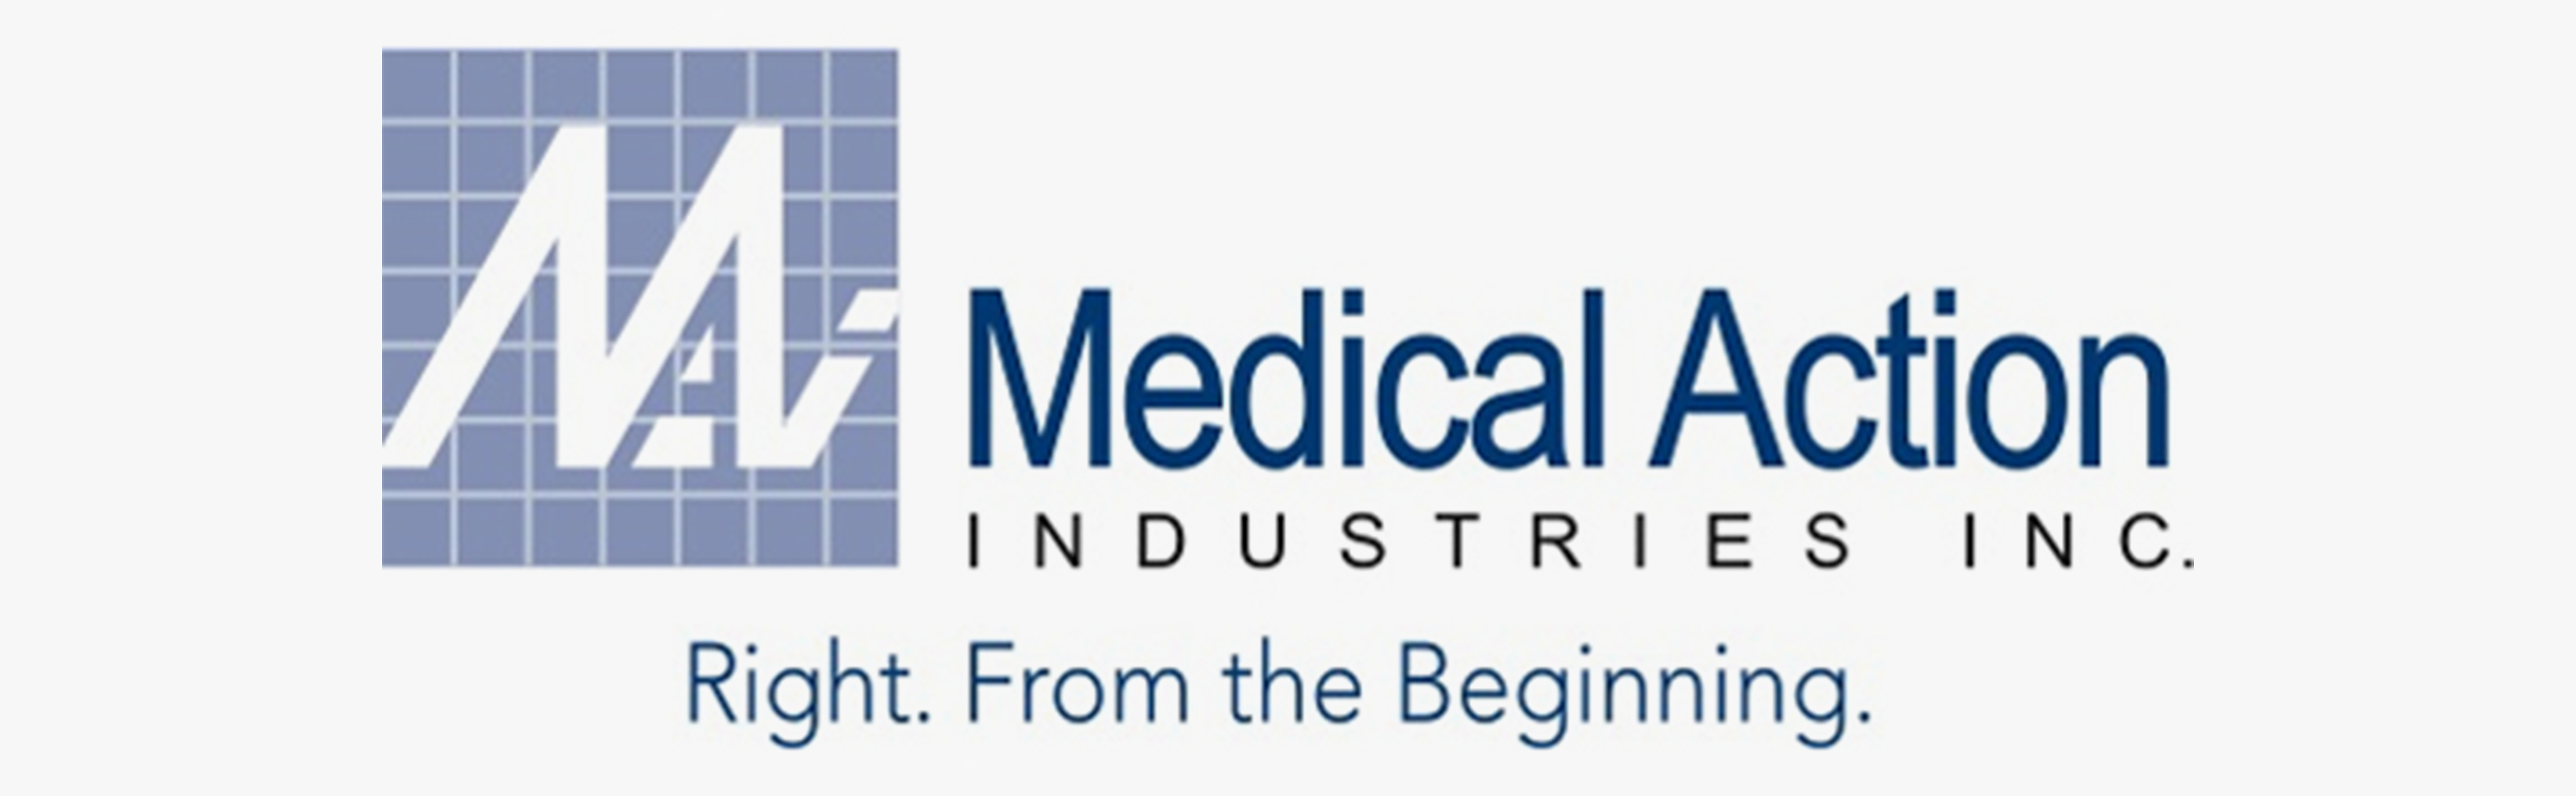 Medical Action Industries